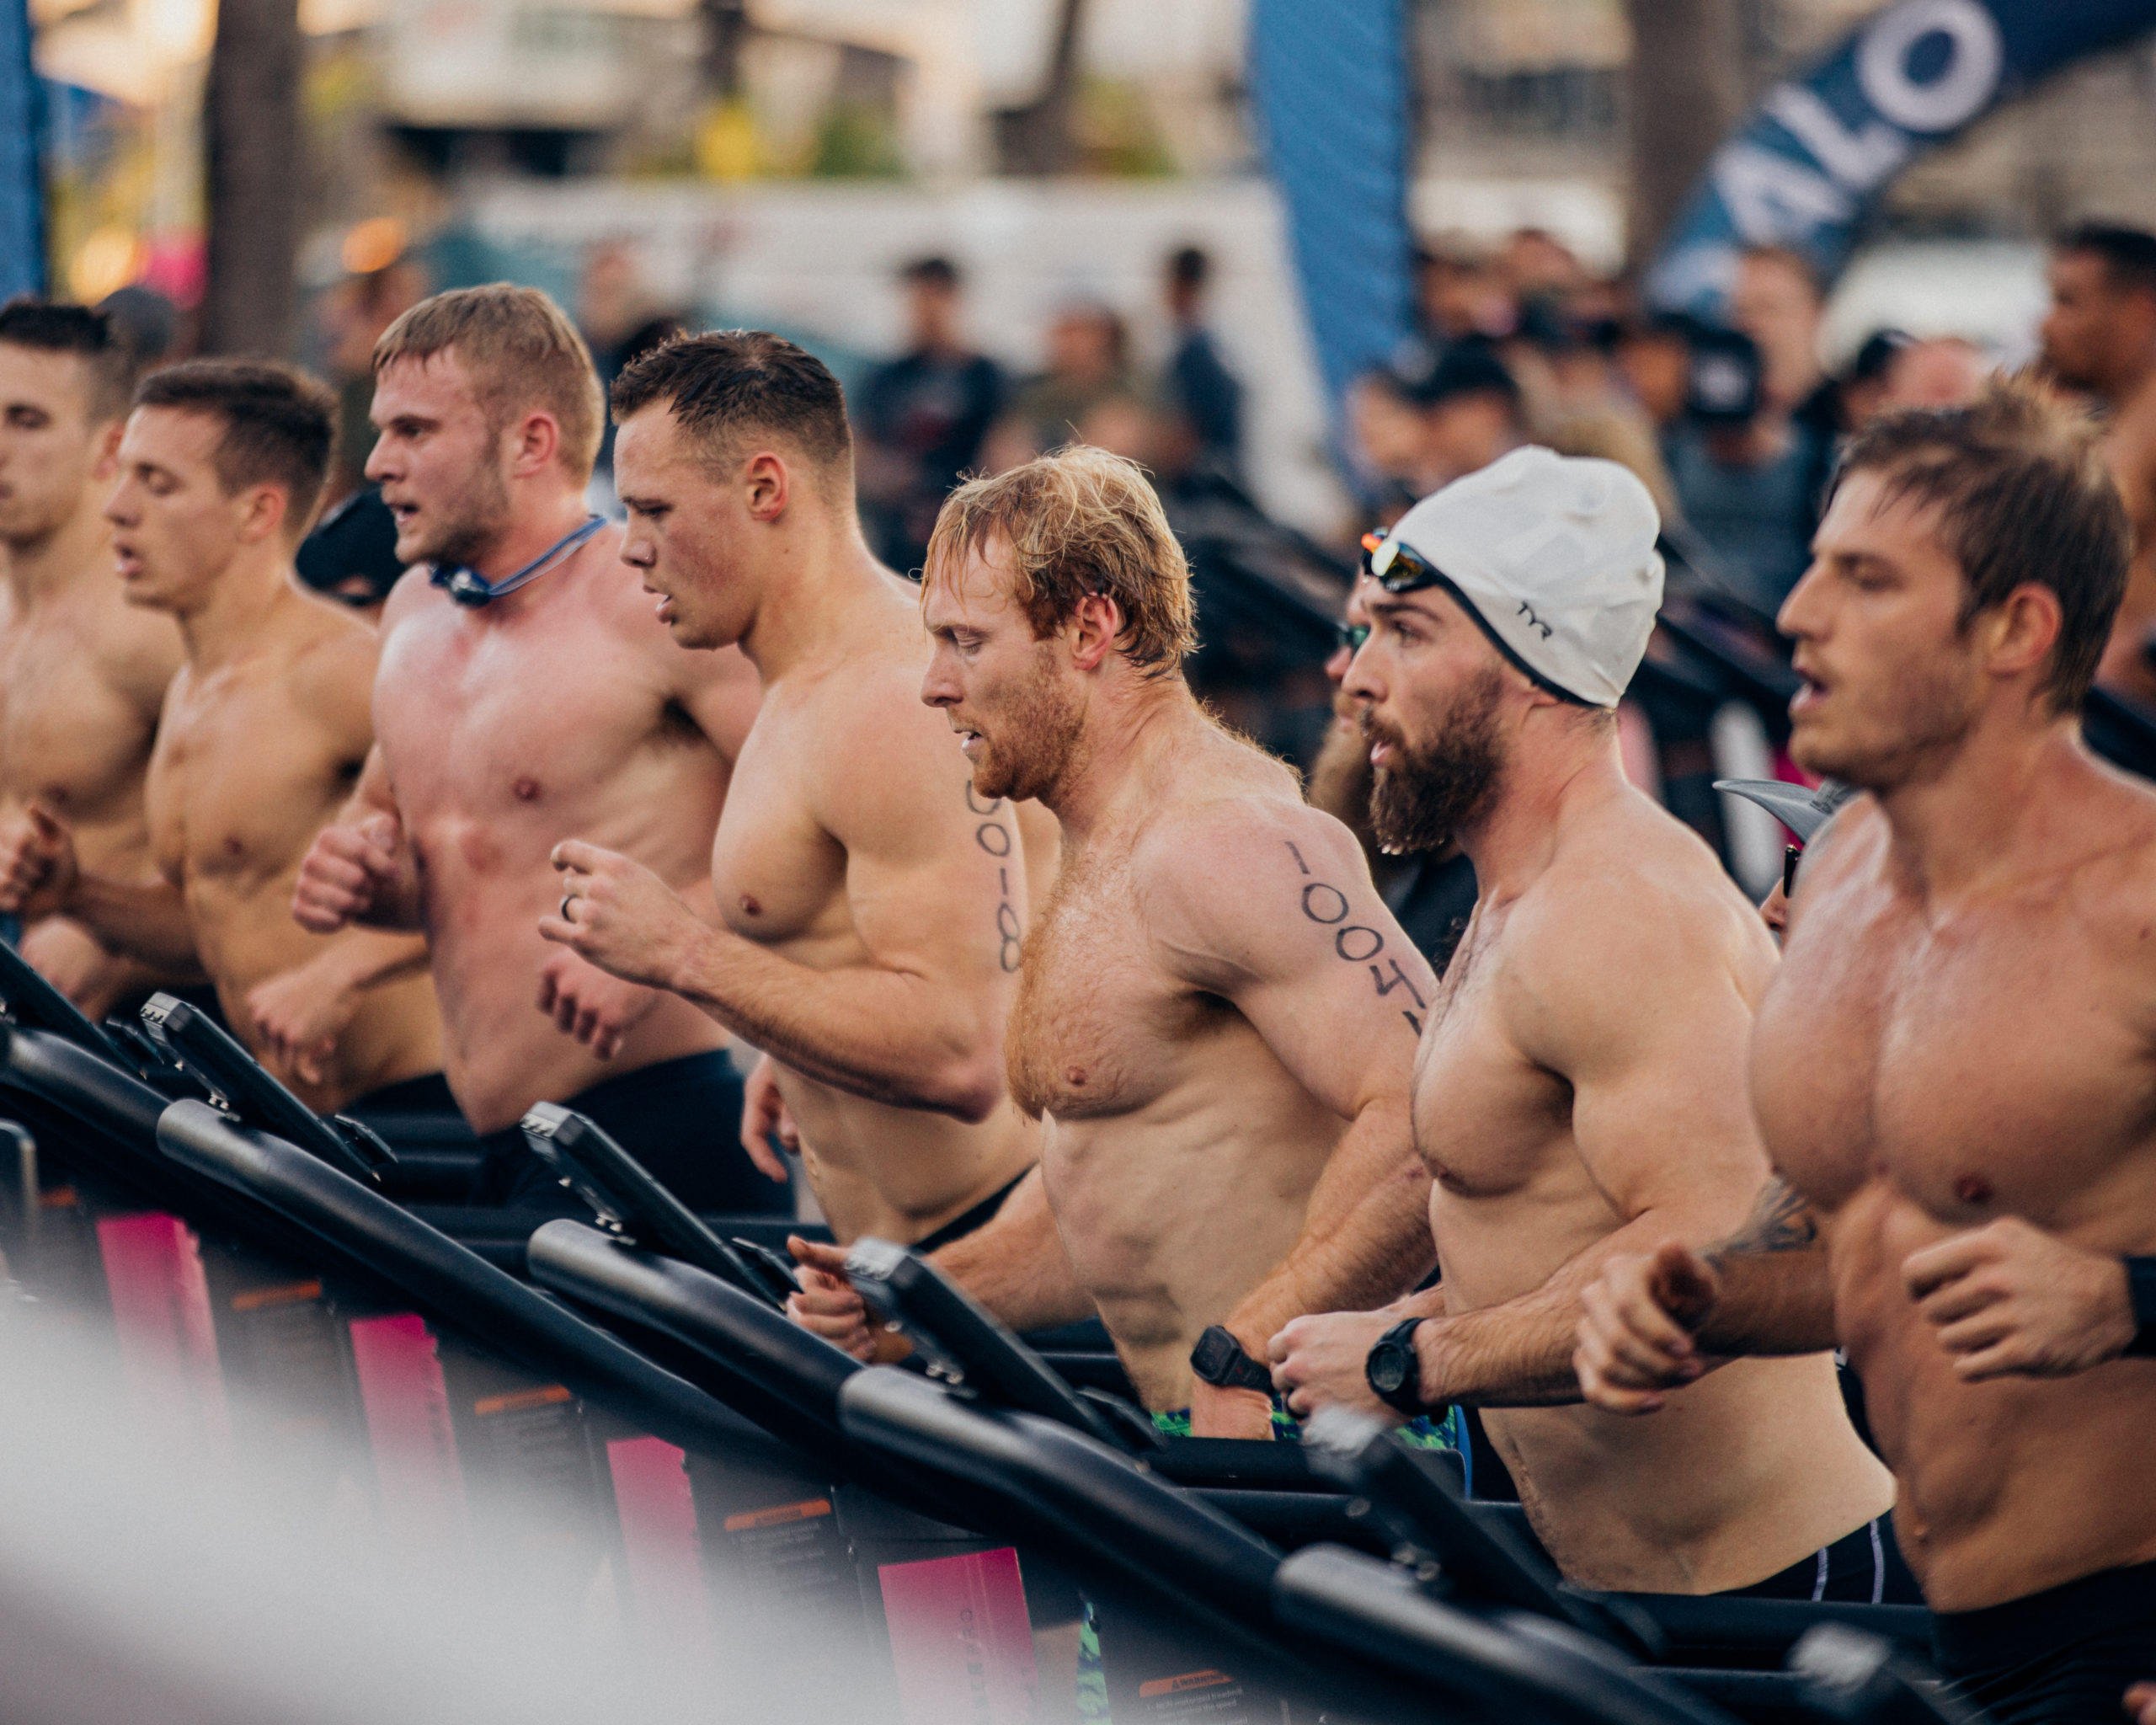 Crossfitter Patrick Vellner (centre) maintains a lead from day one at the Wodapalooza in Miami. Photo: Wodapalooza website